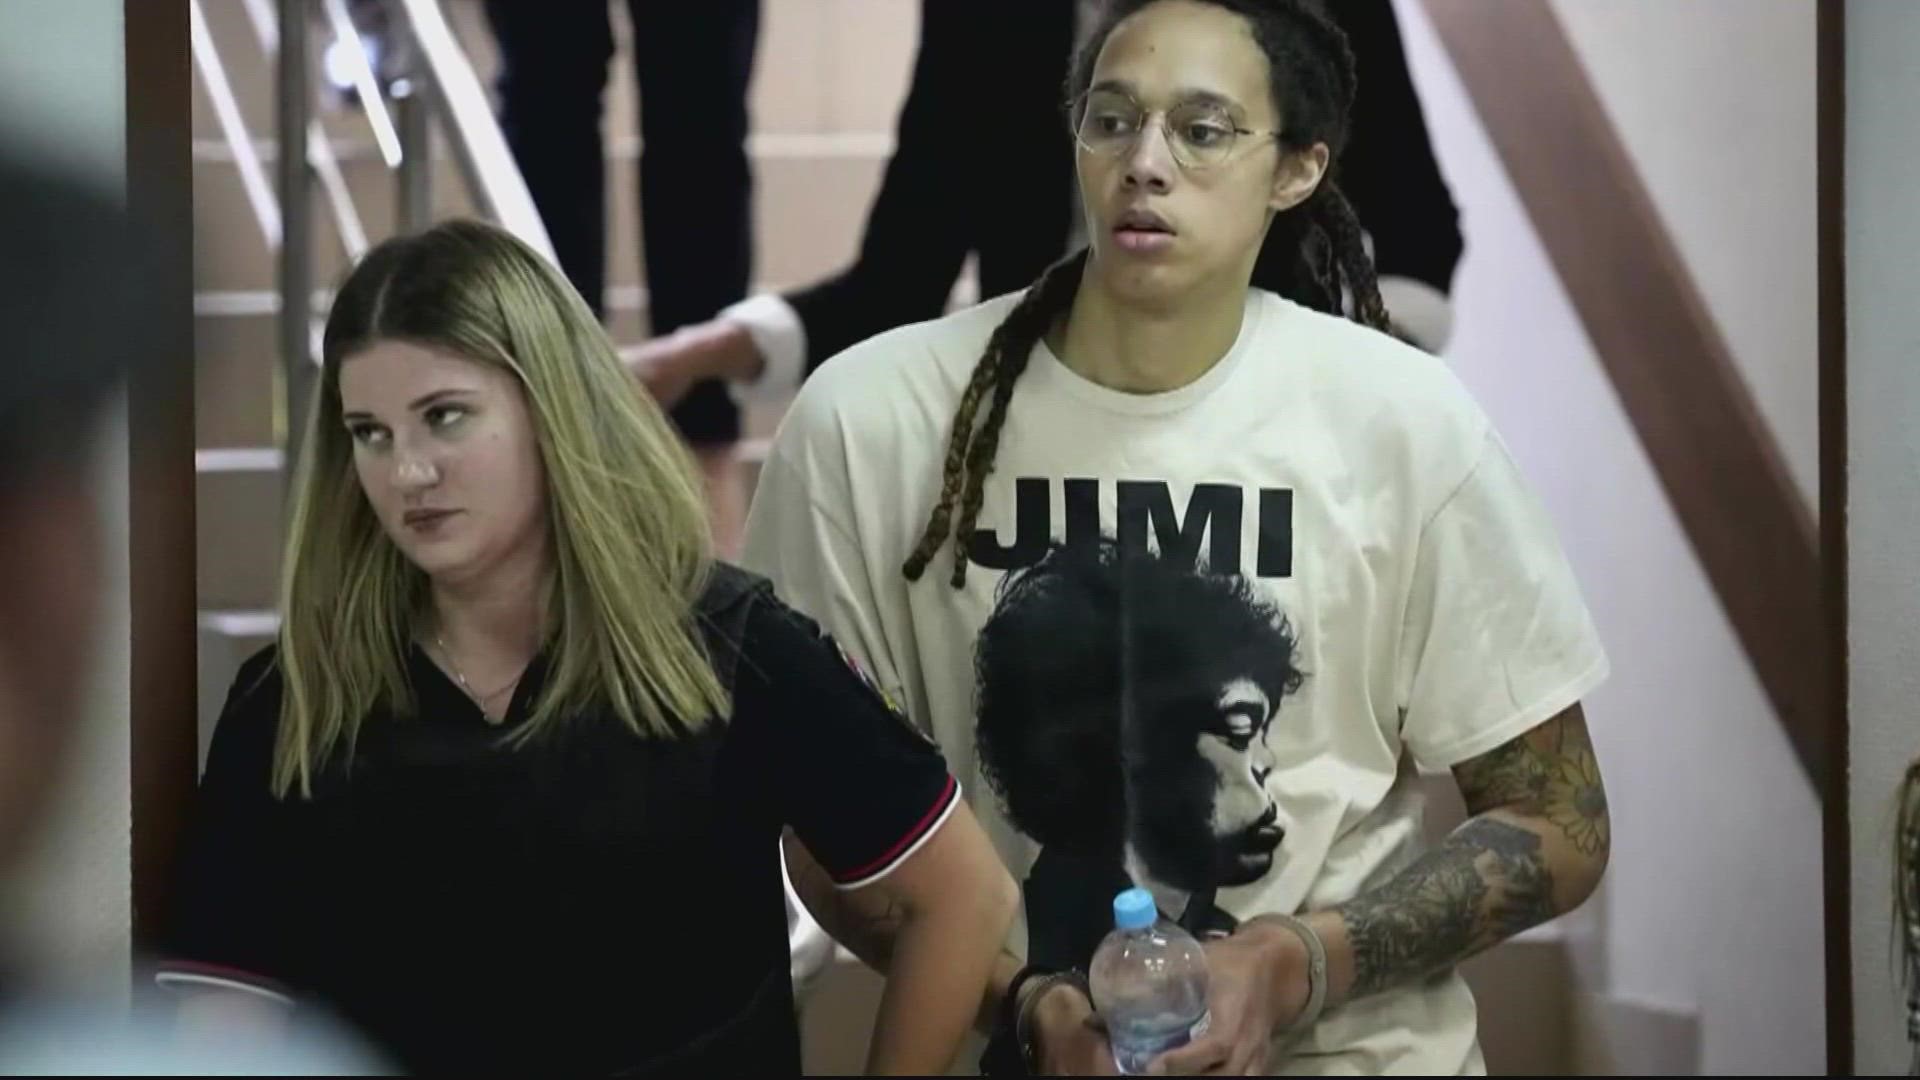 Russia freed WNBA star Brittney Griner on Thursday in a high-profile prisoner exchange, as the U.S. released notorious Russian arms dealer Viktor Bout.